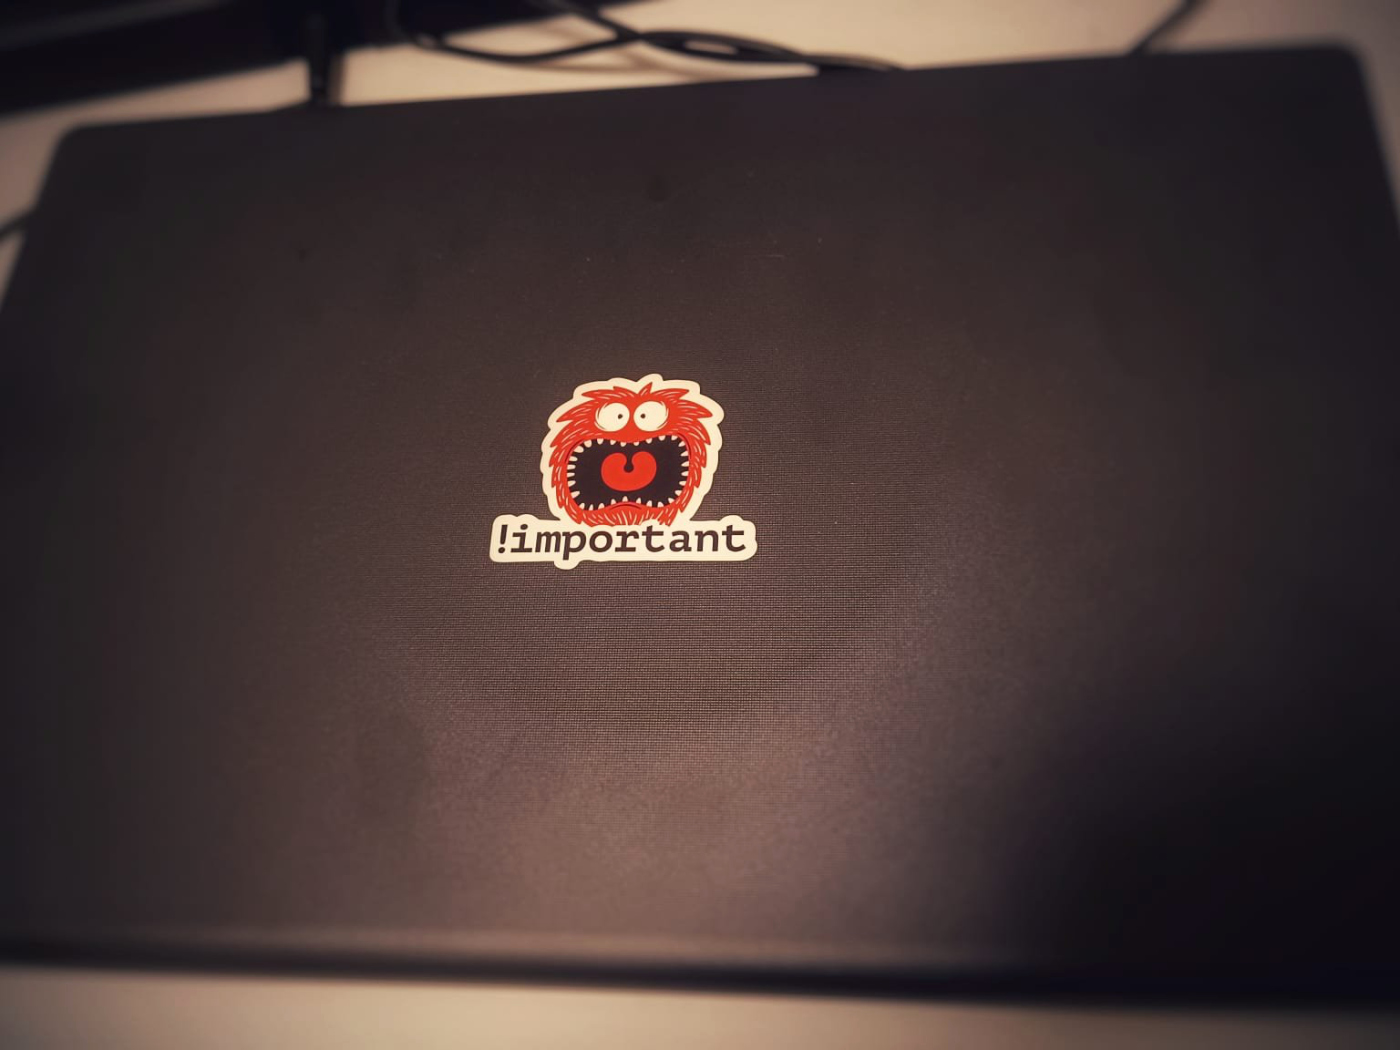 Amit Sheen's laptop with CSS sticker !important.